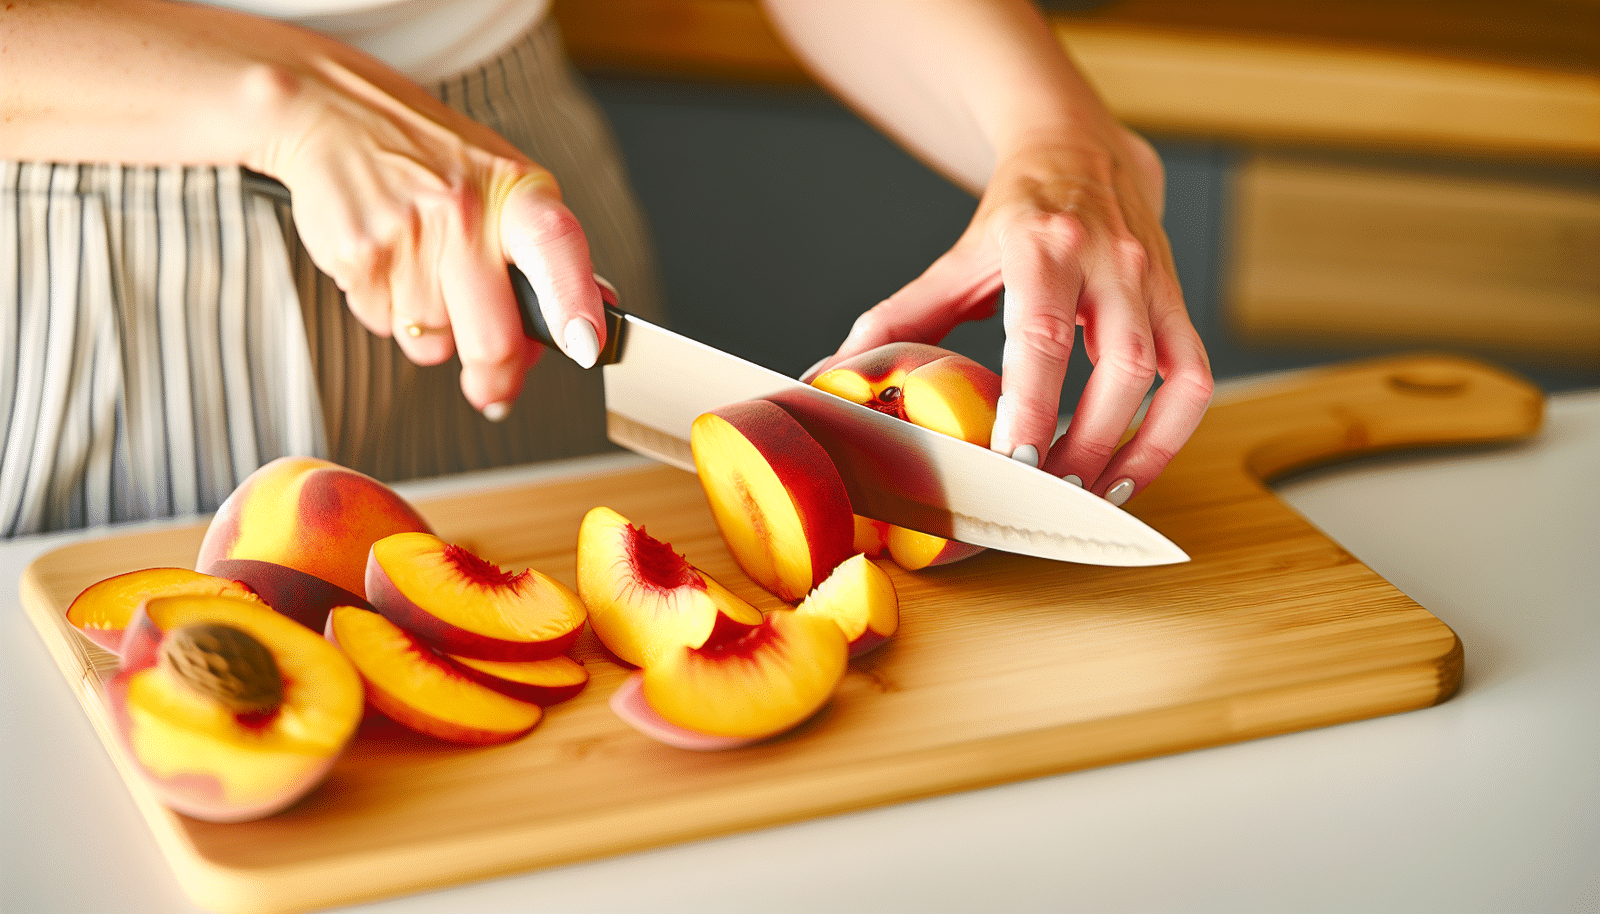 Slicing fresh peaches for oven drying